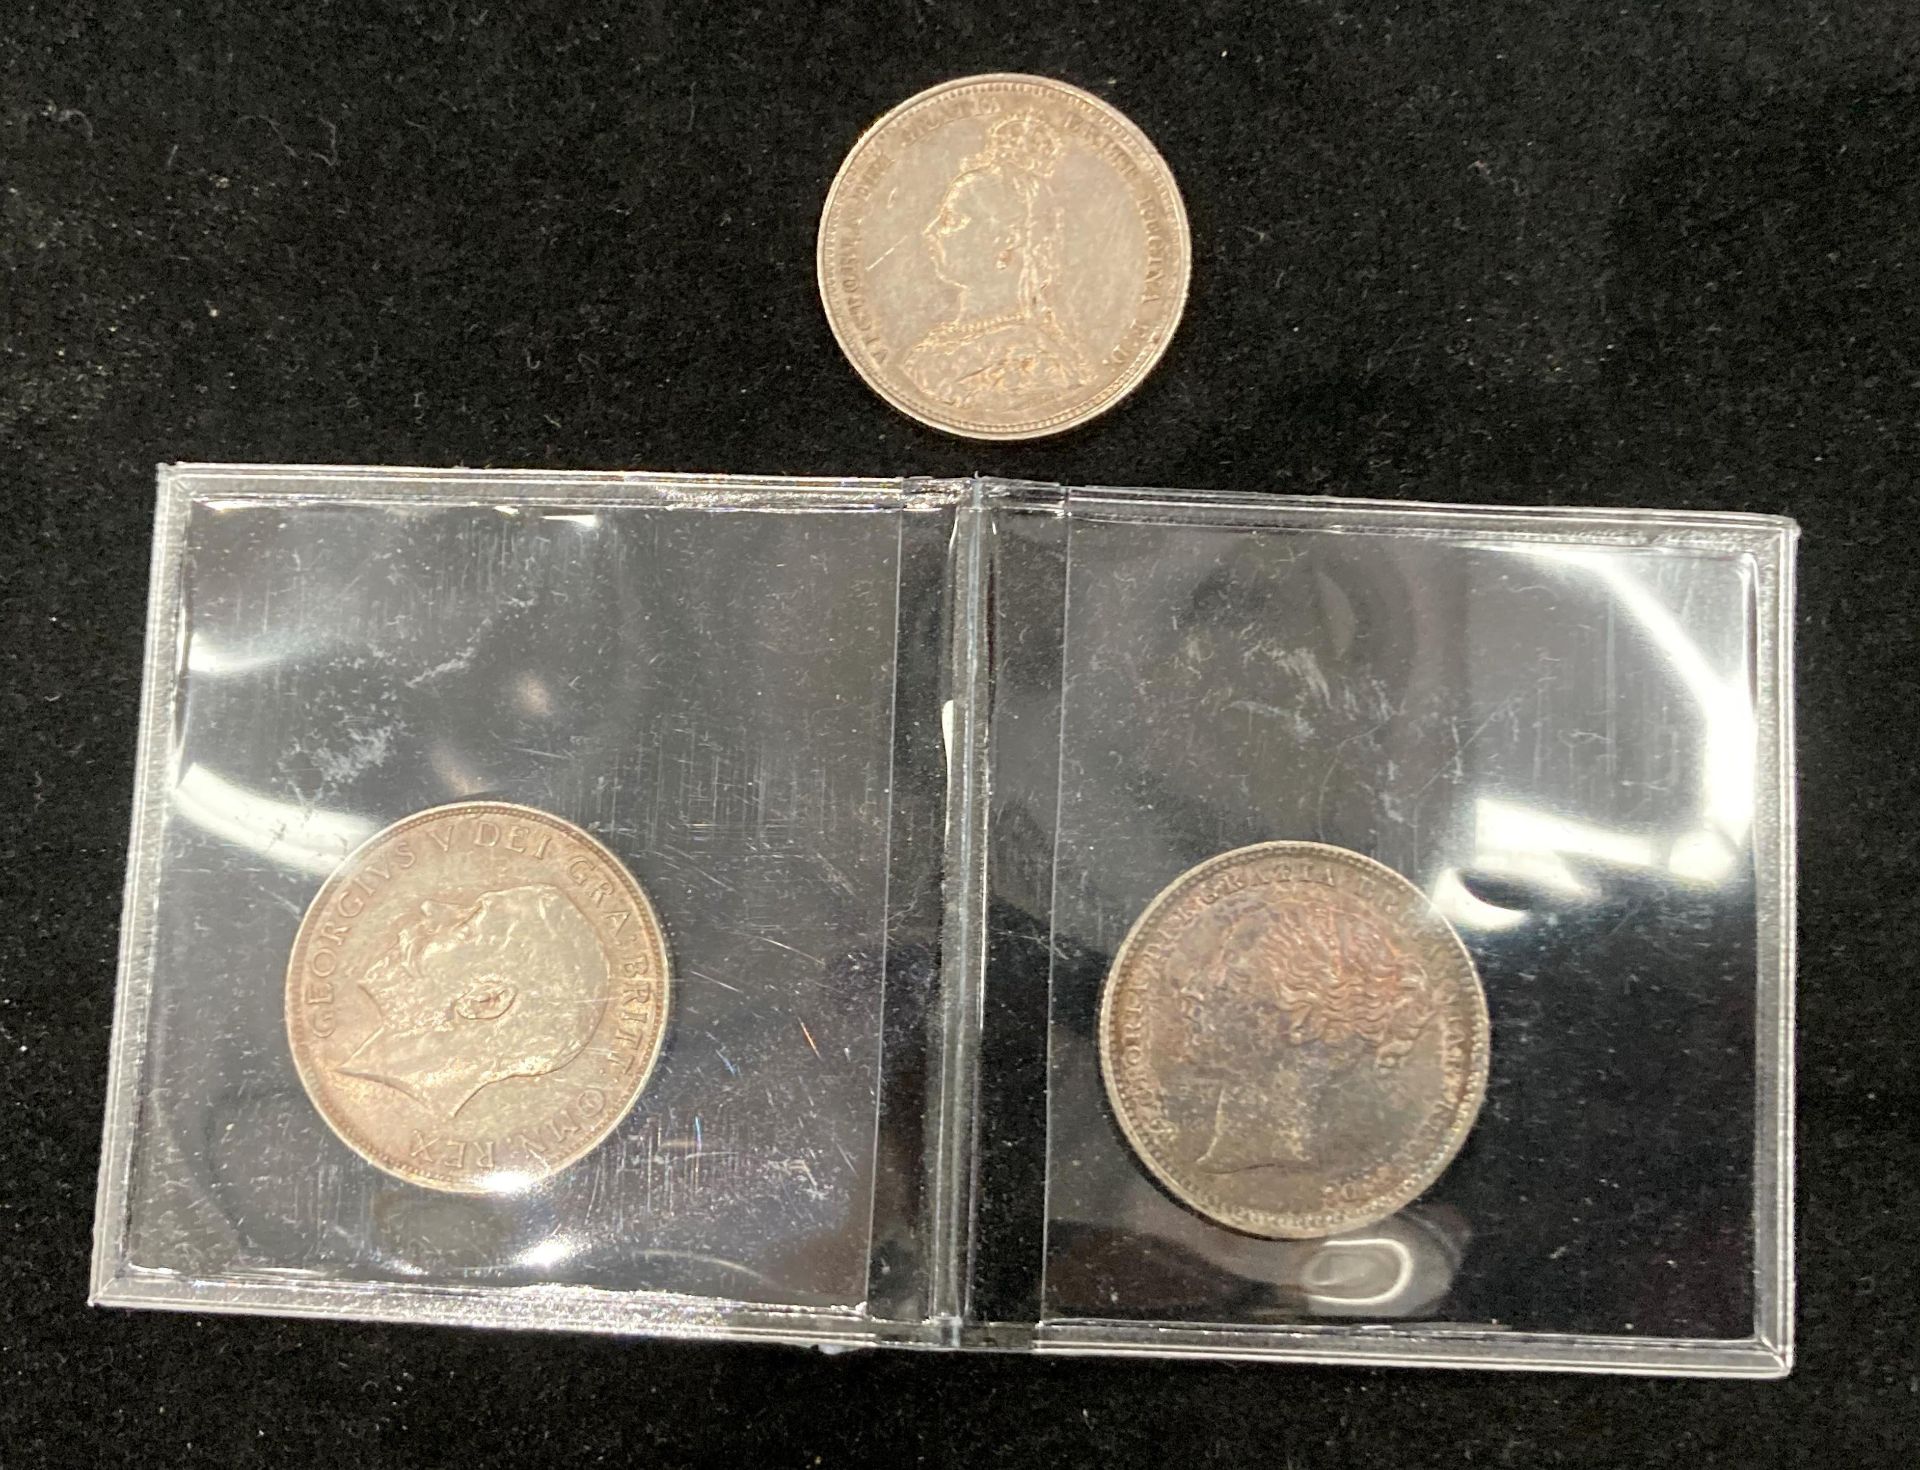 Three high grade silver shillings - 1883, 1888 and 1911.